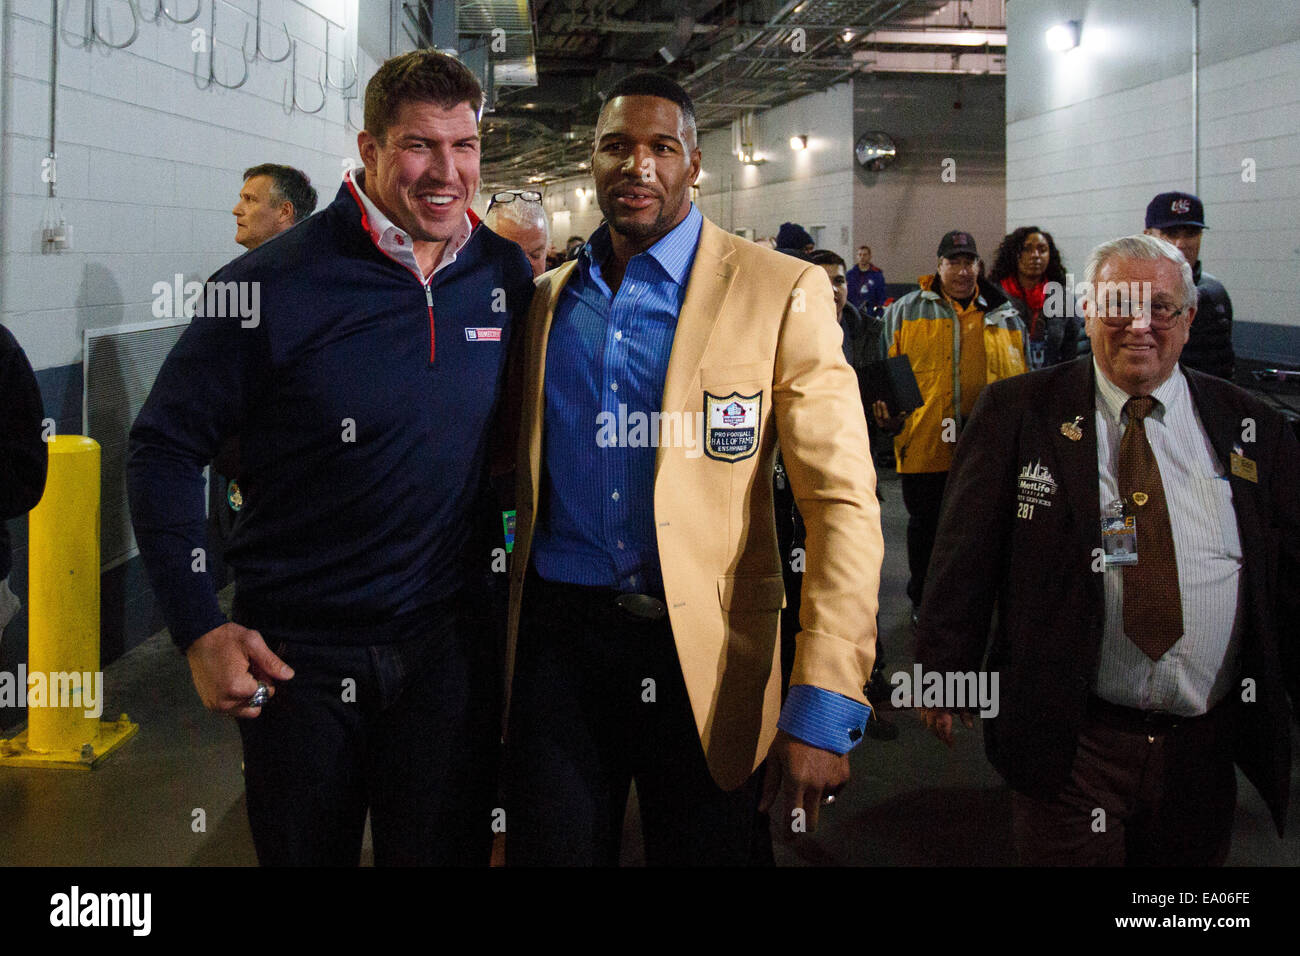 November 3, 2014: NFL Hall of Famer Michael Strahan talk with former Giant David Diehl after his ring ceremony during the NFL game between the Indianapolis Colts and the New York Giants at MetLife Stadium in East Rutherford, New Jersey. The Indianapolis Colts won 40-24. (Christopher Szagola/Cal Sport Media) Stock Photo